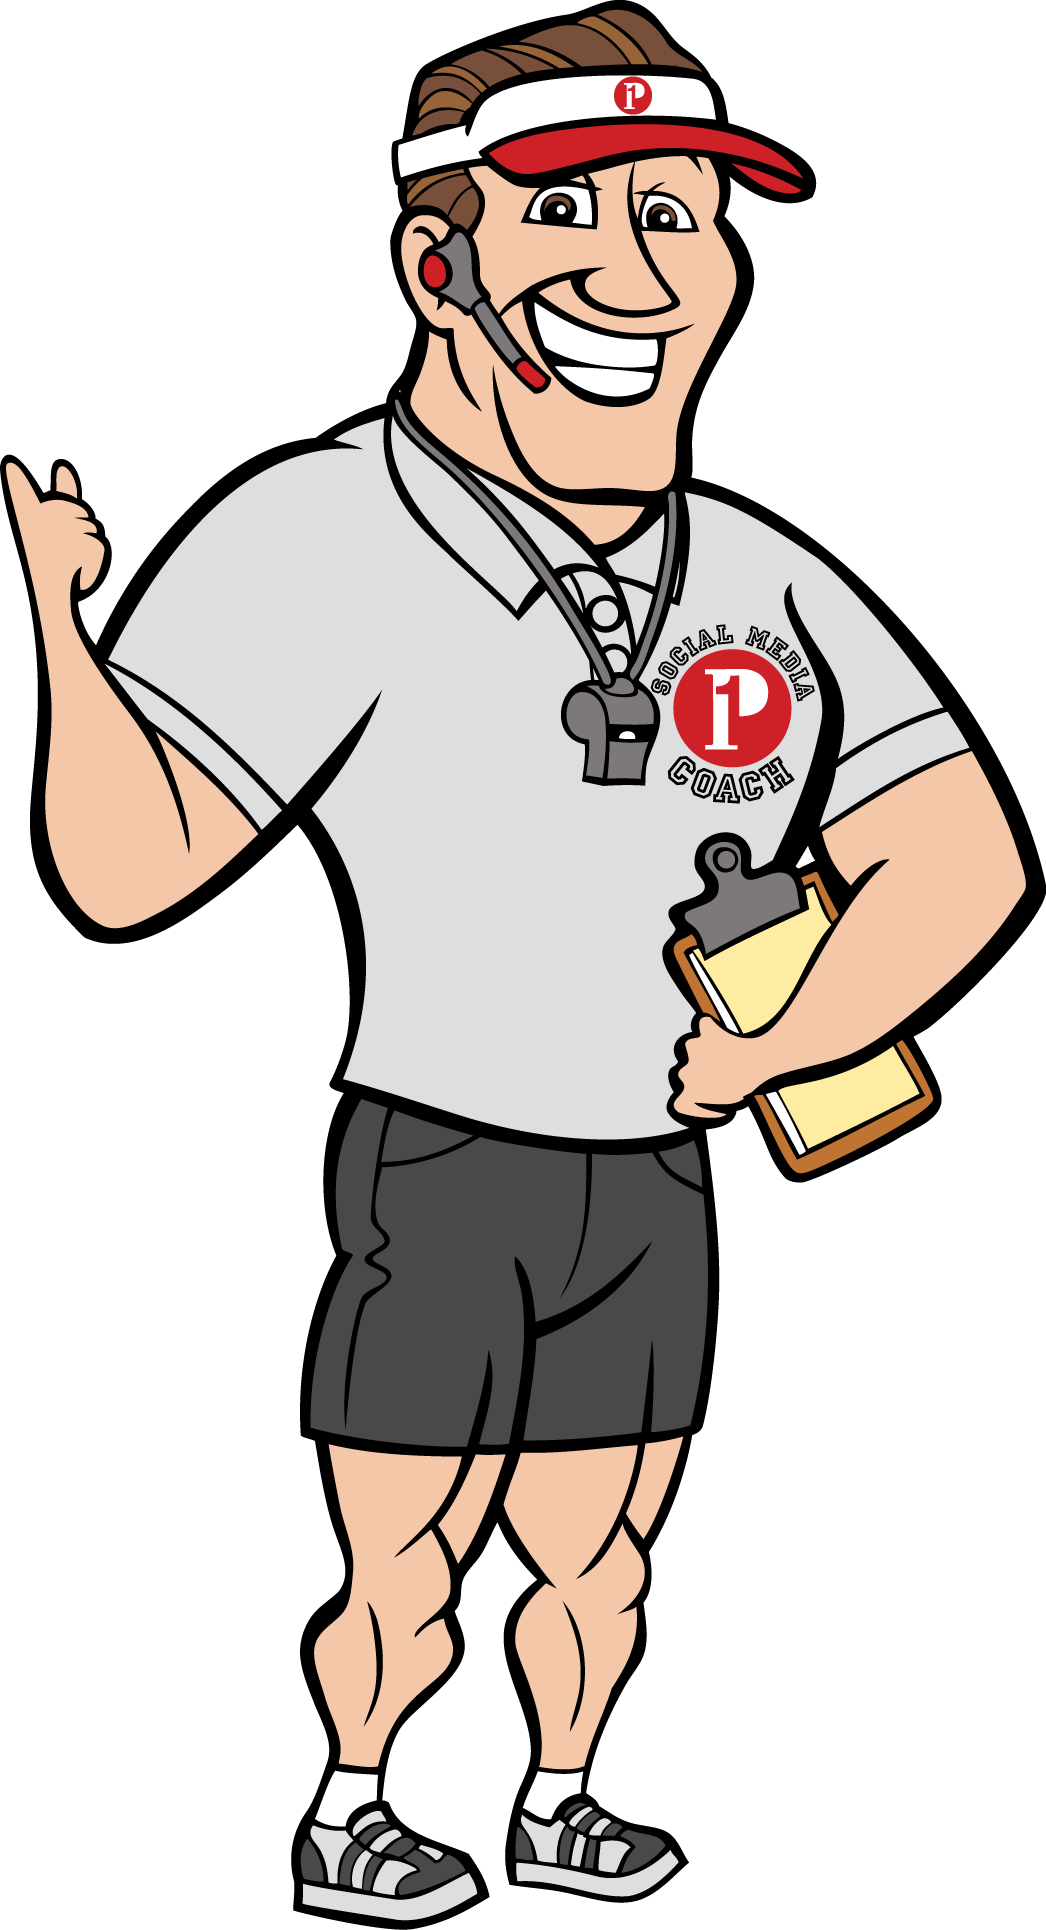 How to improve your. Coach clipart fitness coach